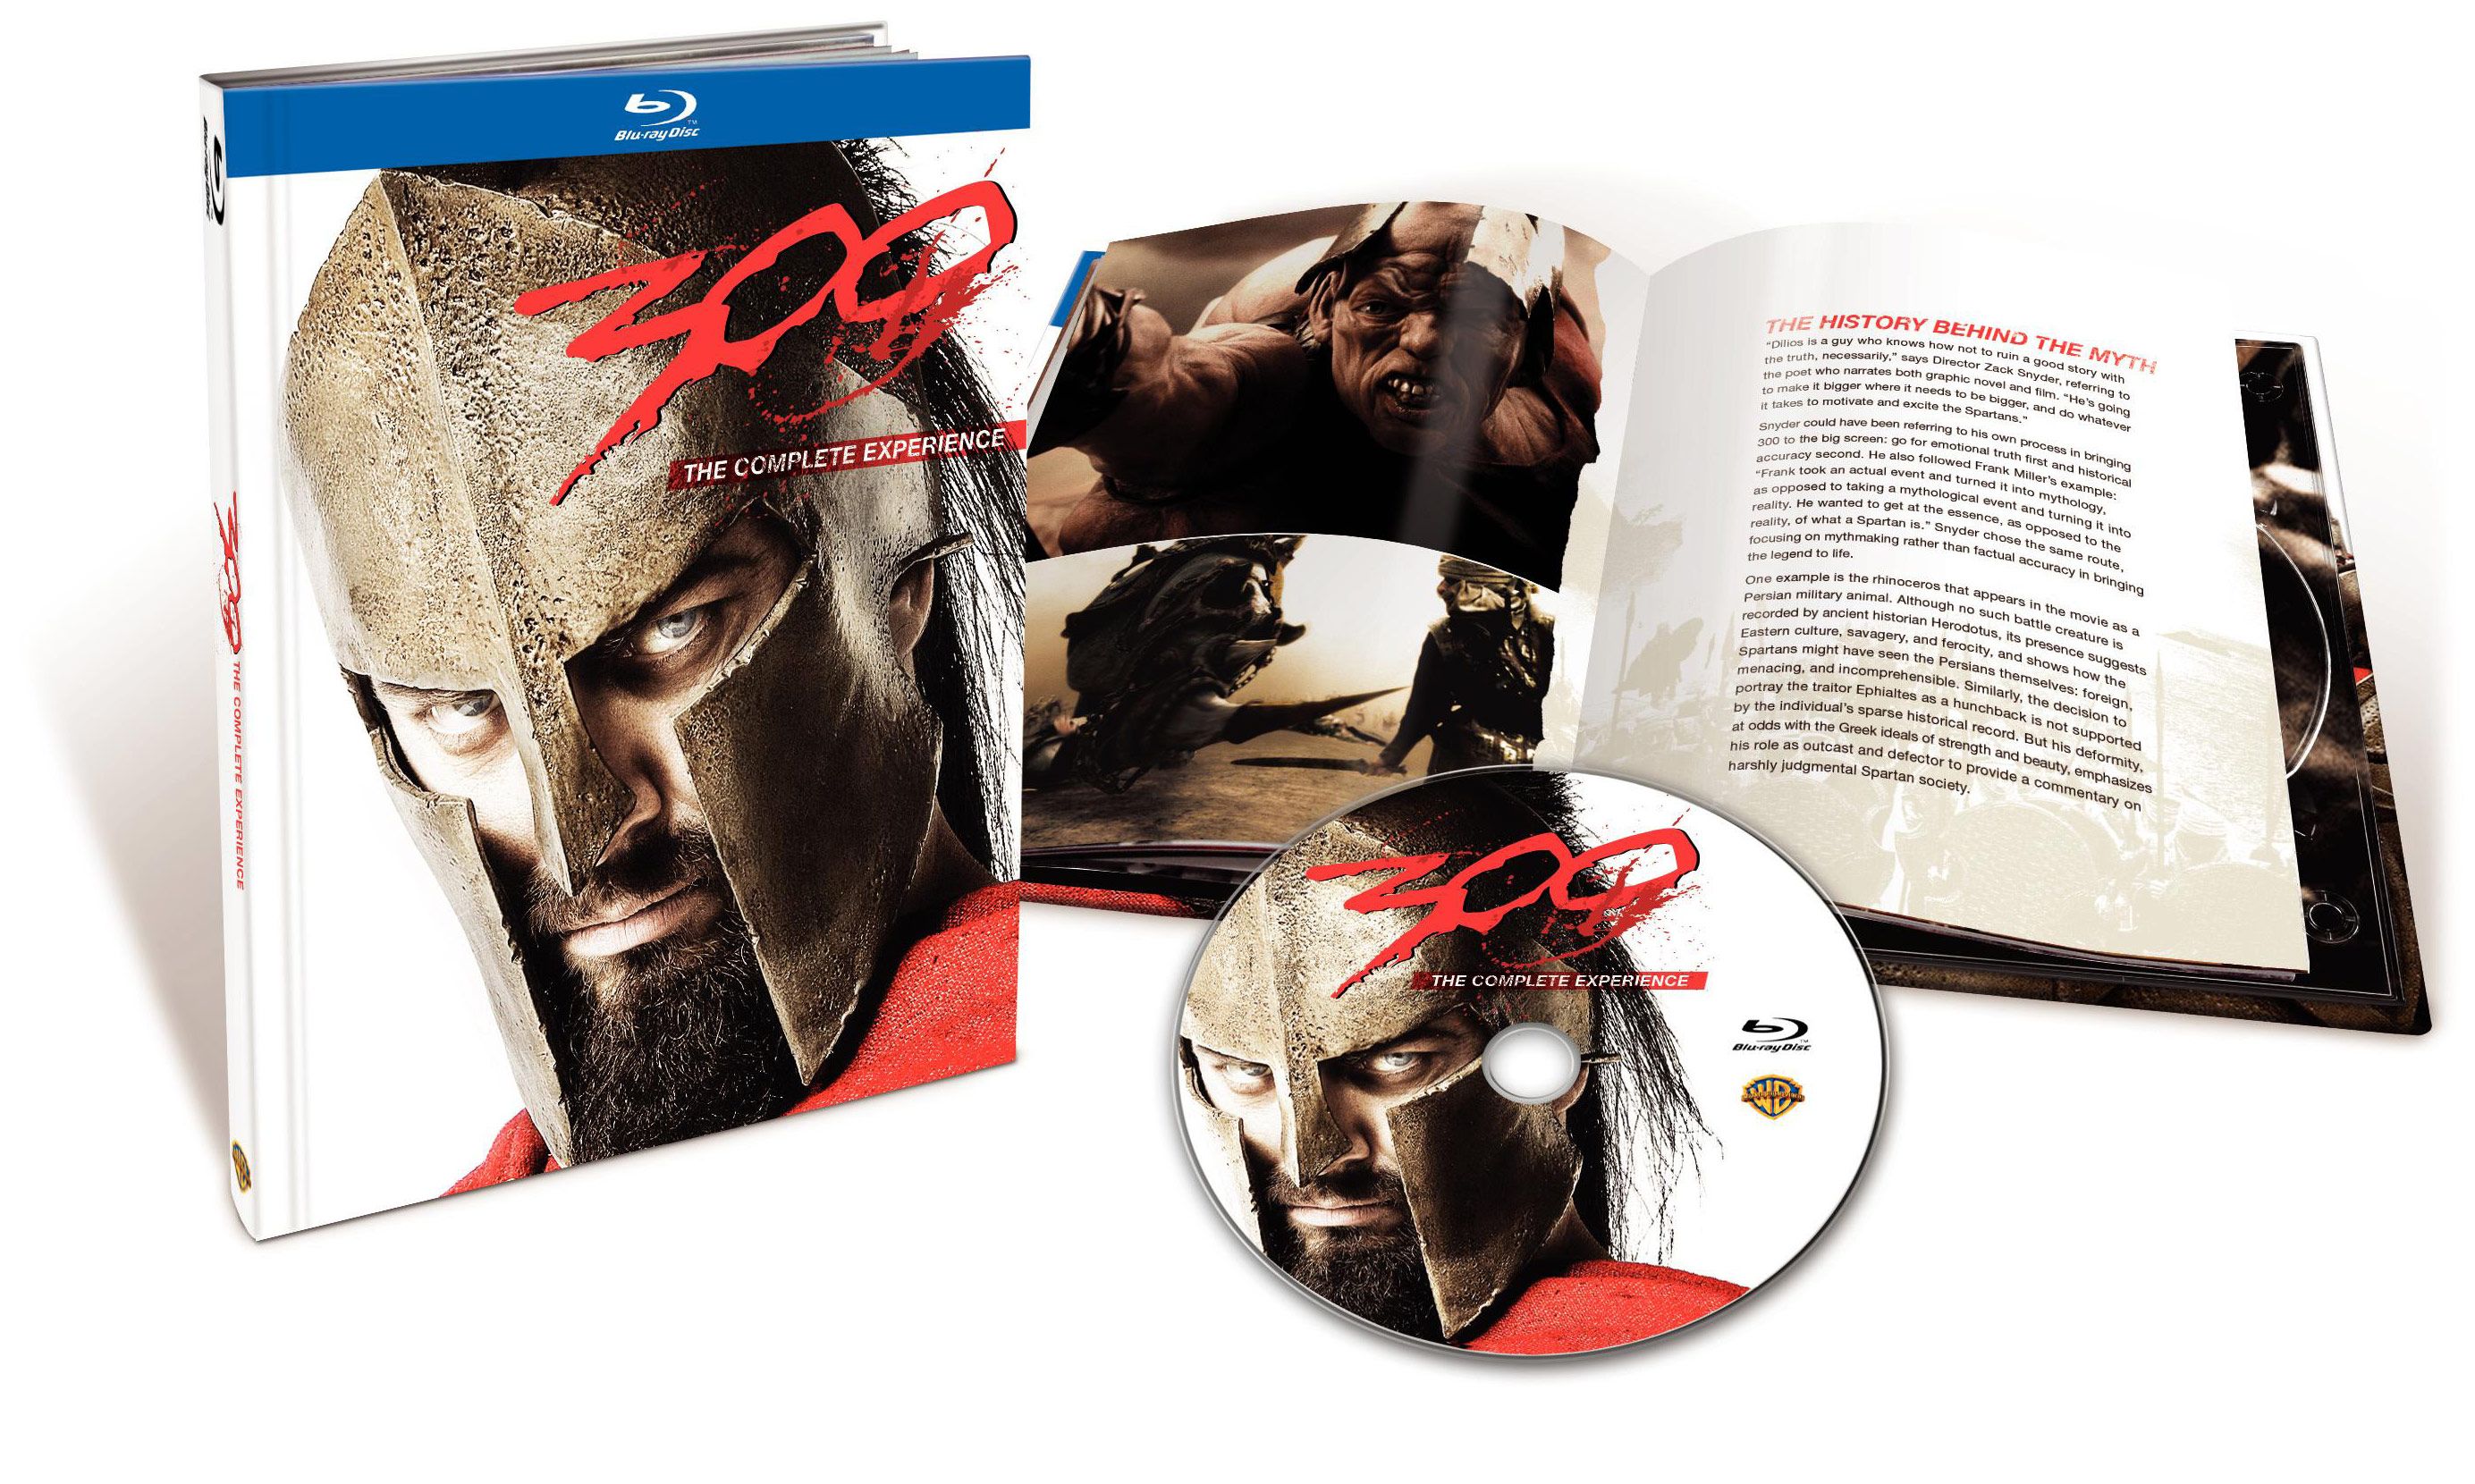 300: The Complete Experience